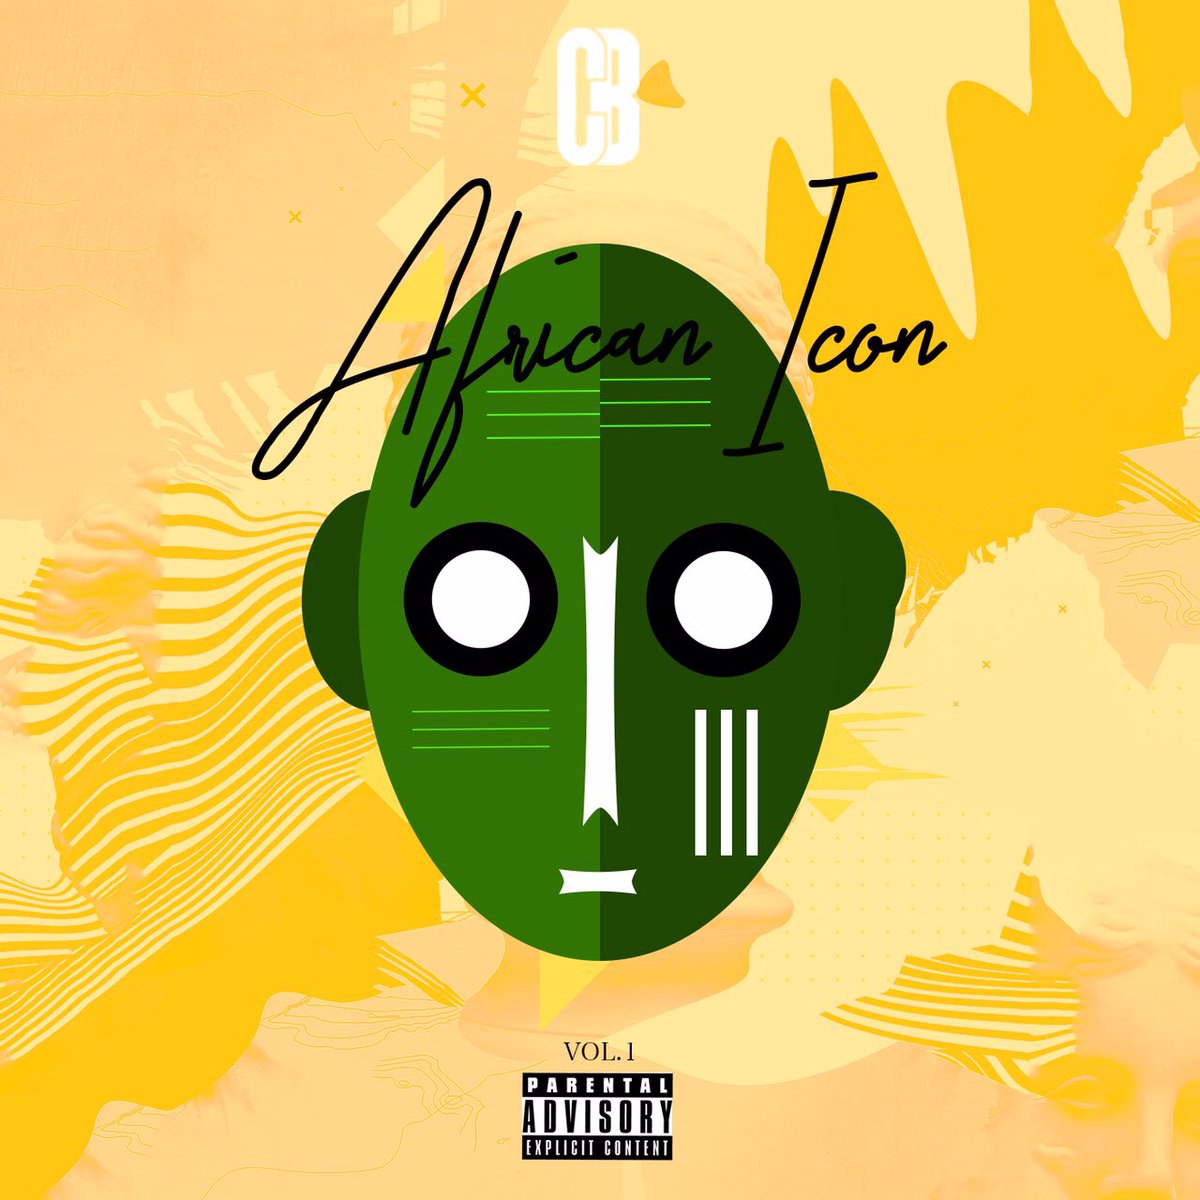 Chad Da Don & Locnville,Release Their EP Titled "African Icon Vol 1"